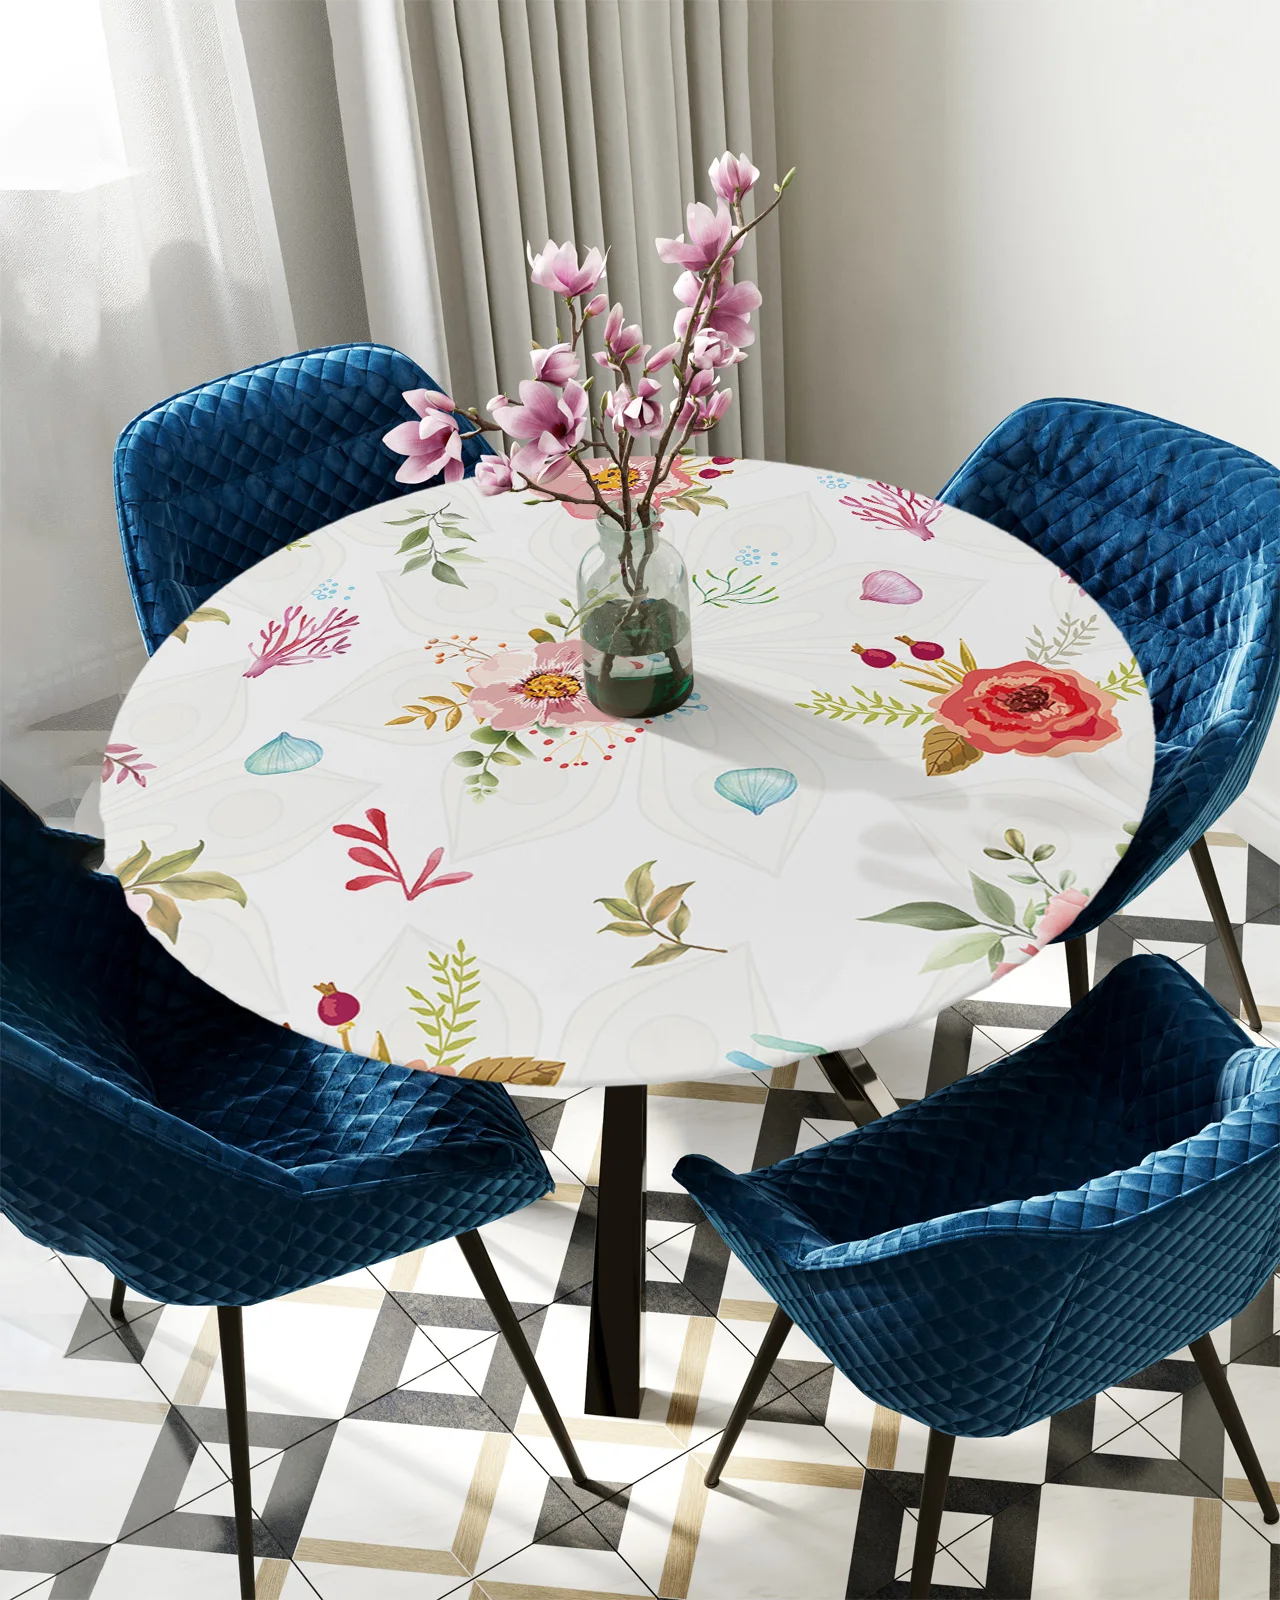 

Flowers Foliage Round Tablecloth Waterproof Table Cover Home Decoration Dining Room Elastic Tablecloth